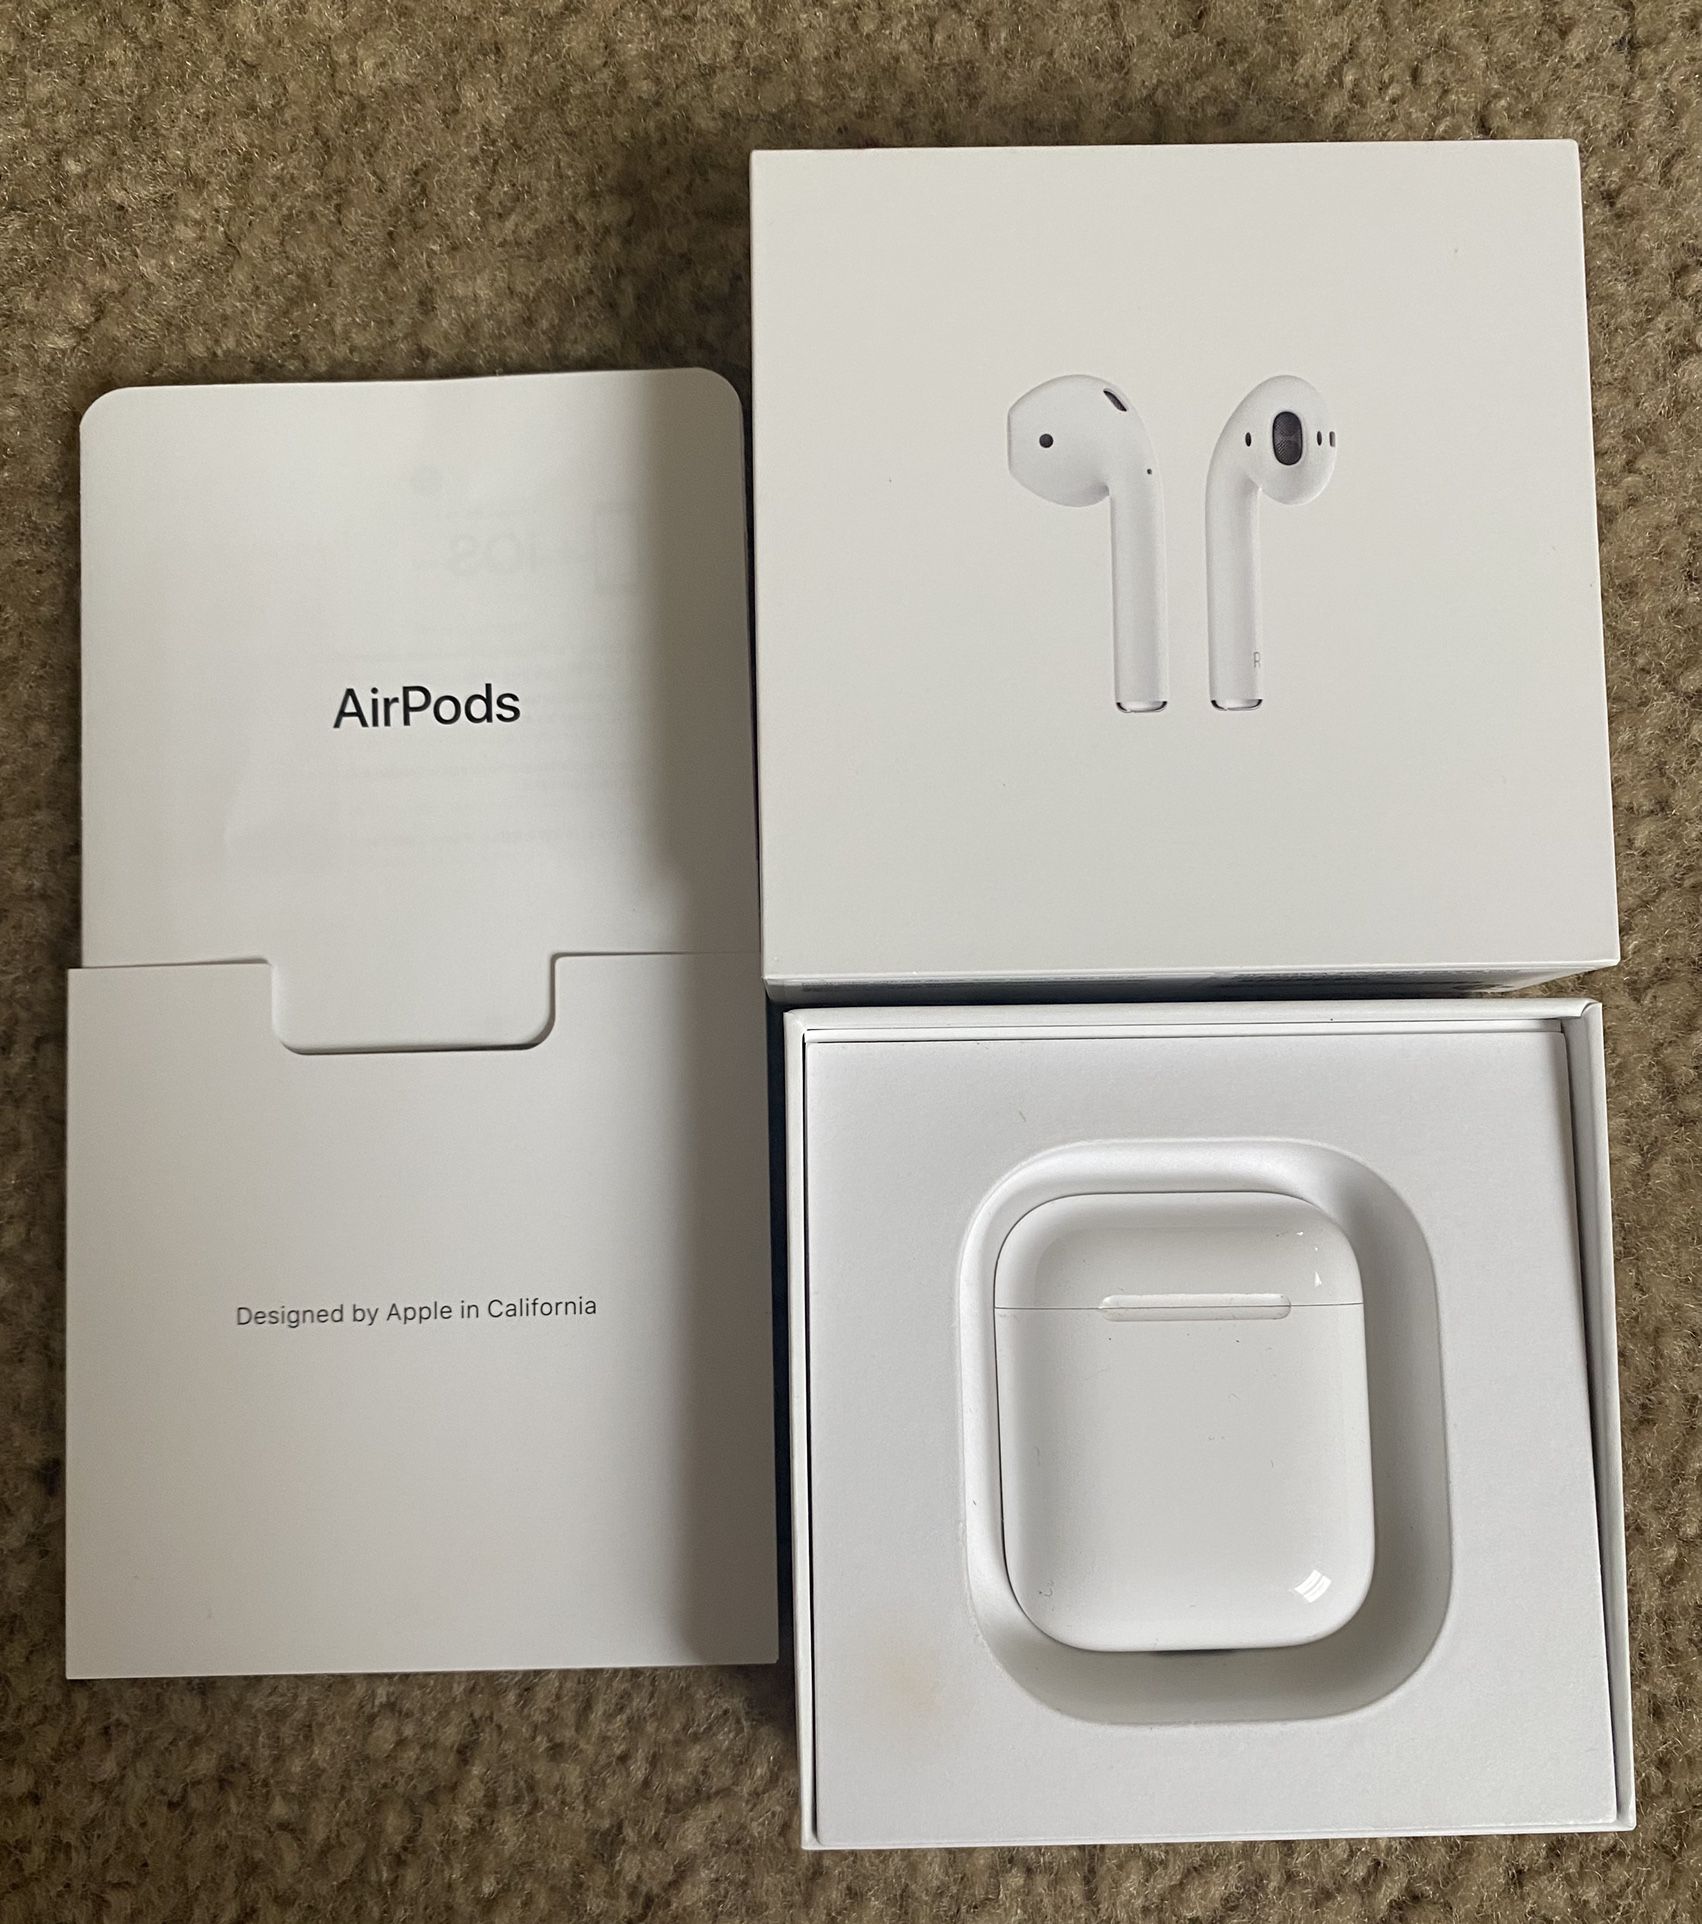 Hilsen Forskel Tahiti Apple Iphone airpods / Headset / Bluetooth with charging case, manual, and  box- Model A2032A2031A1602 for Sale in Great Meadows, NJ - OfferUp